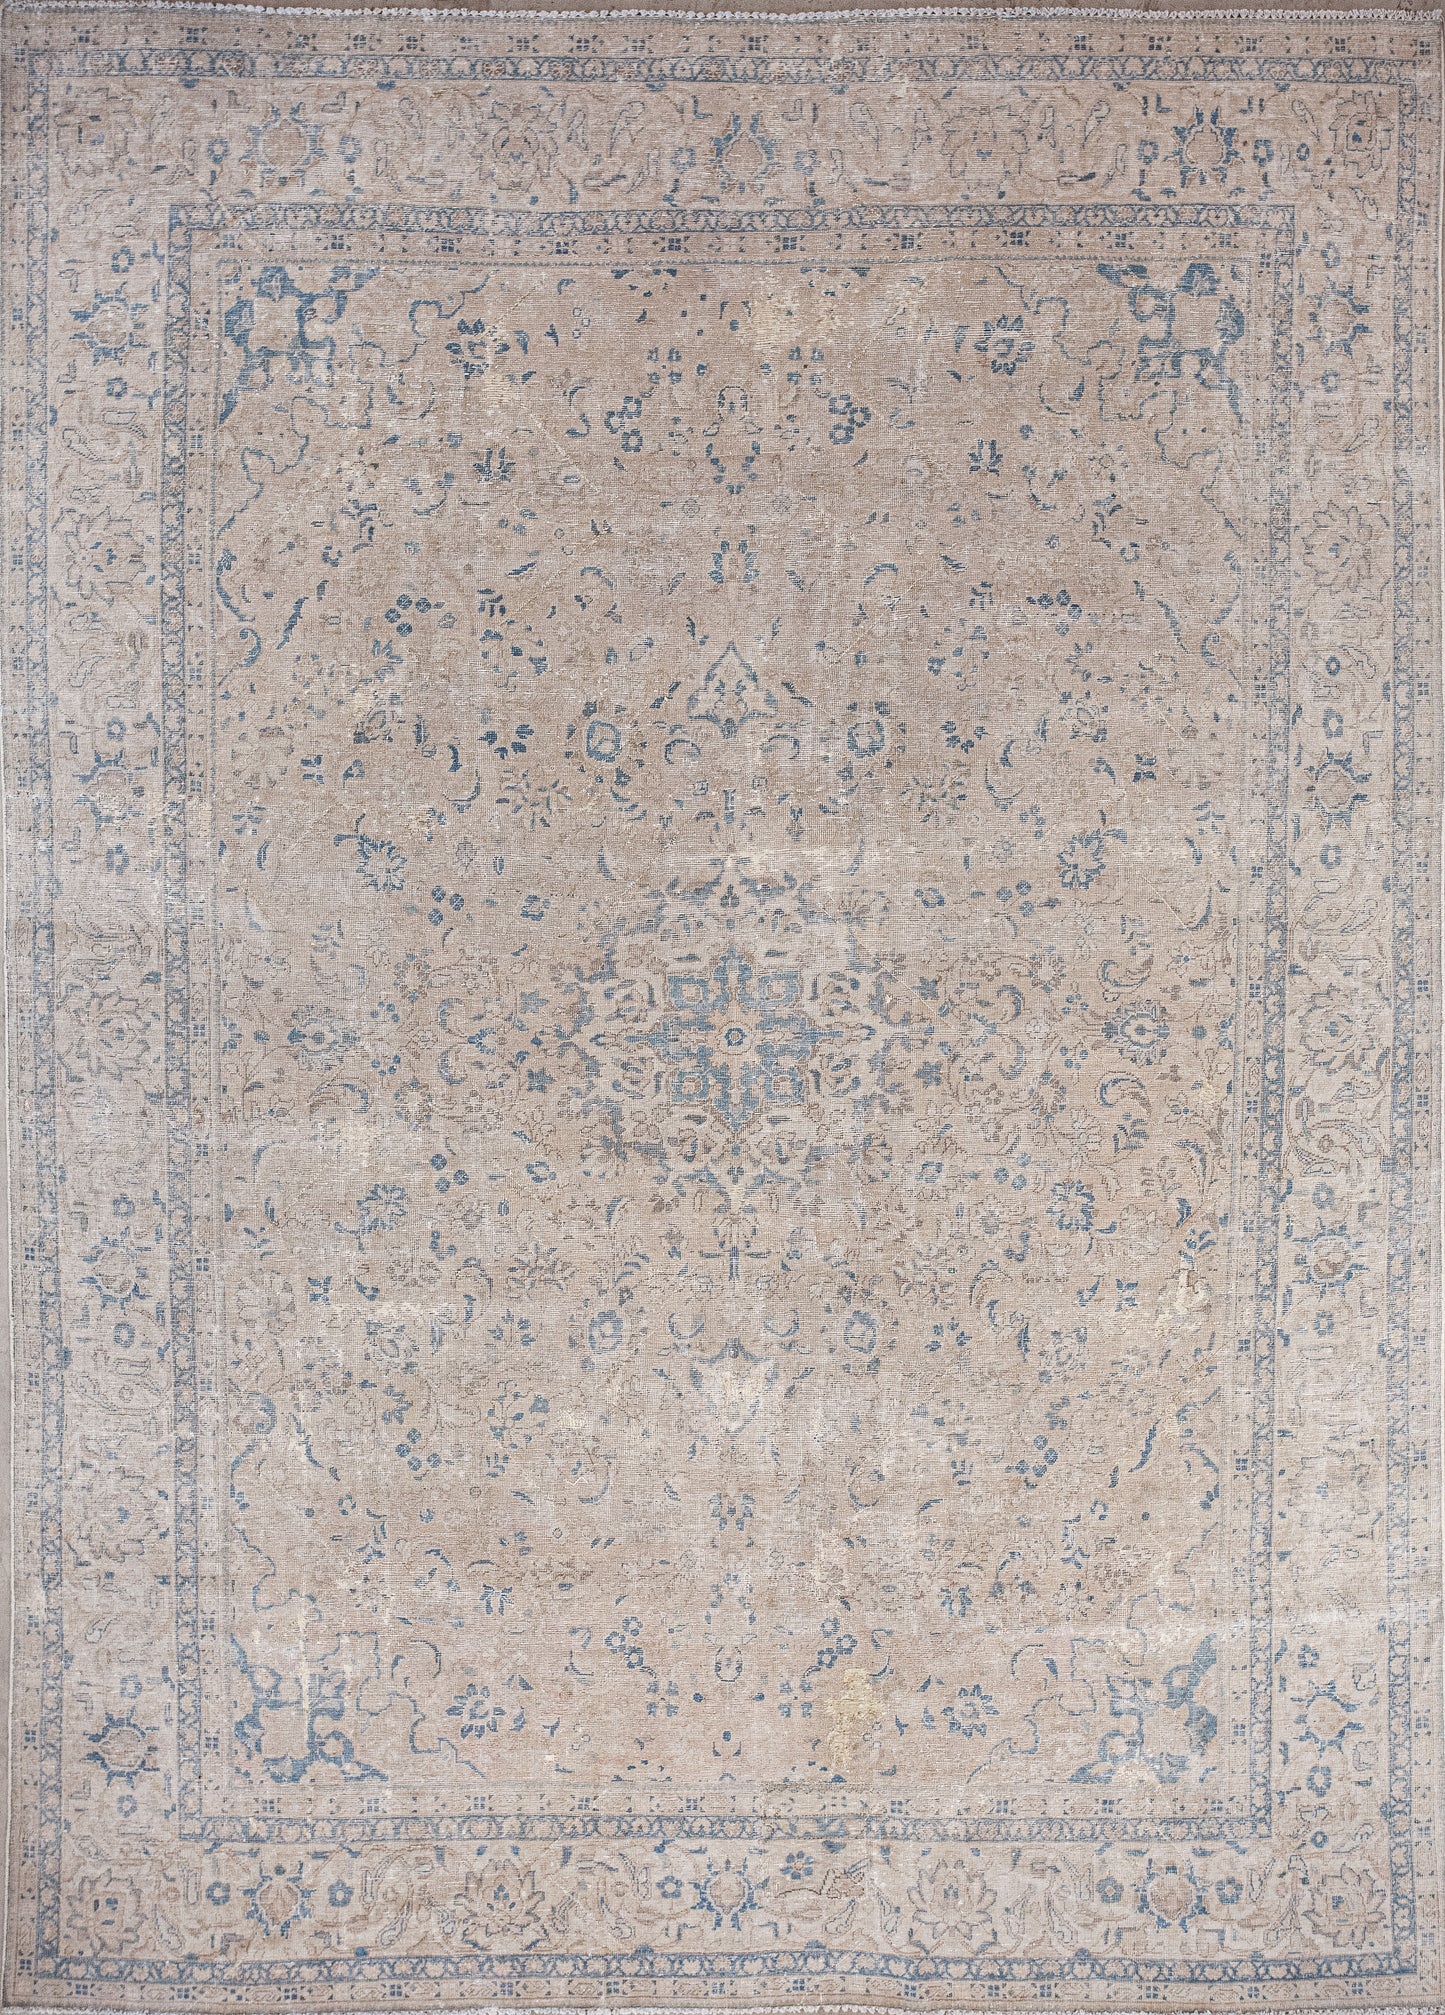 A superior rug was woven with an elegant champagne tone background. The light blue trim pattern adds flair to this quality rug.